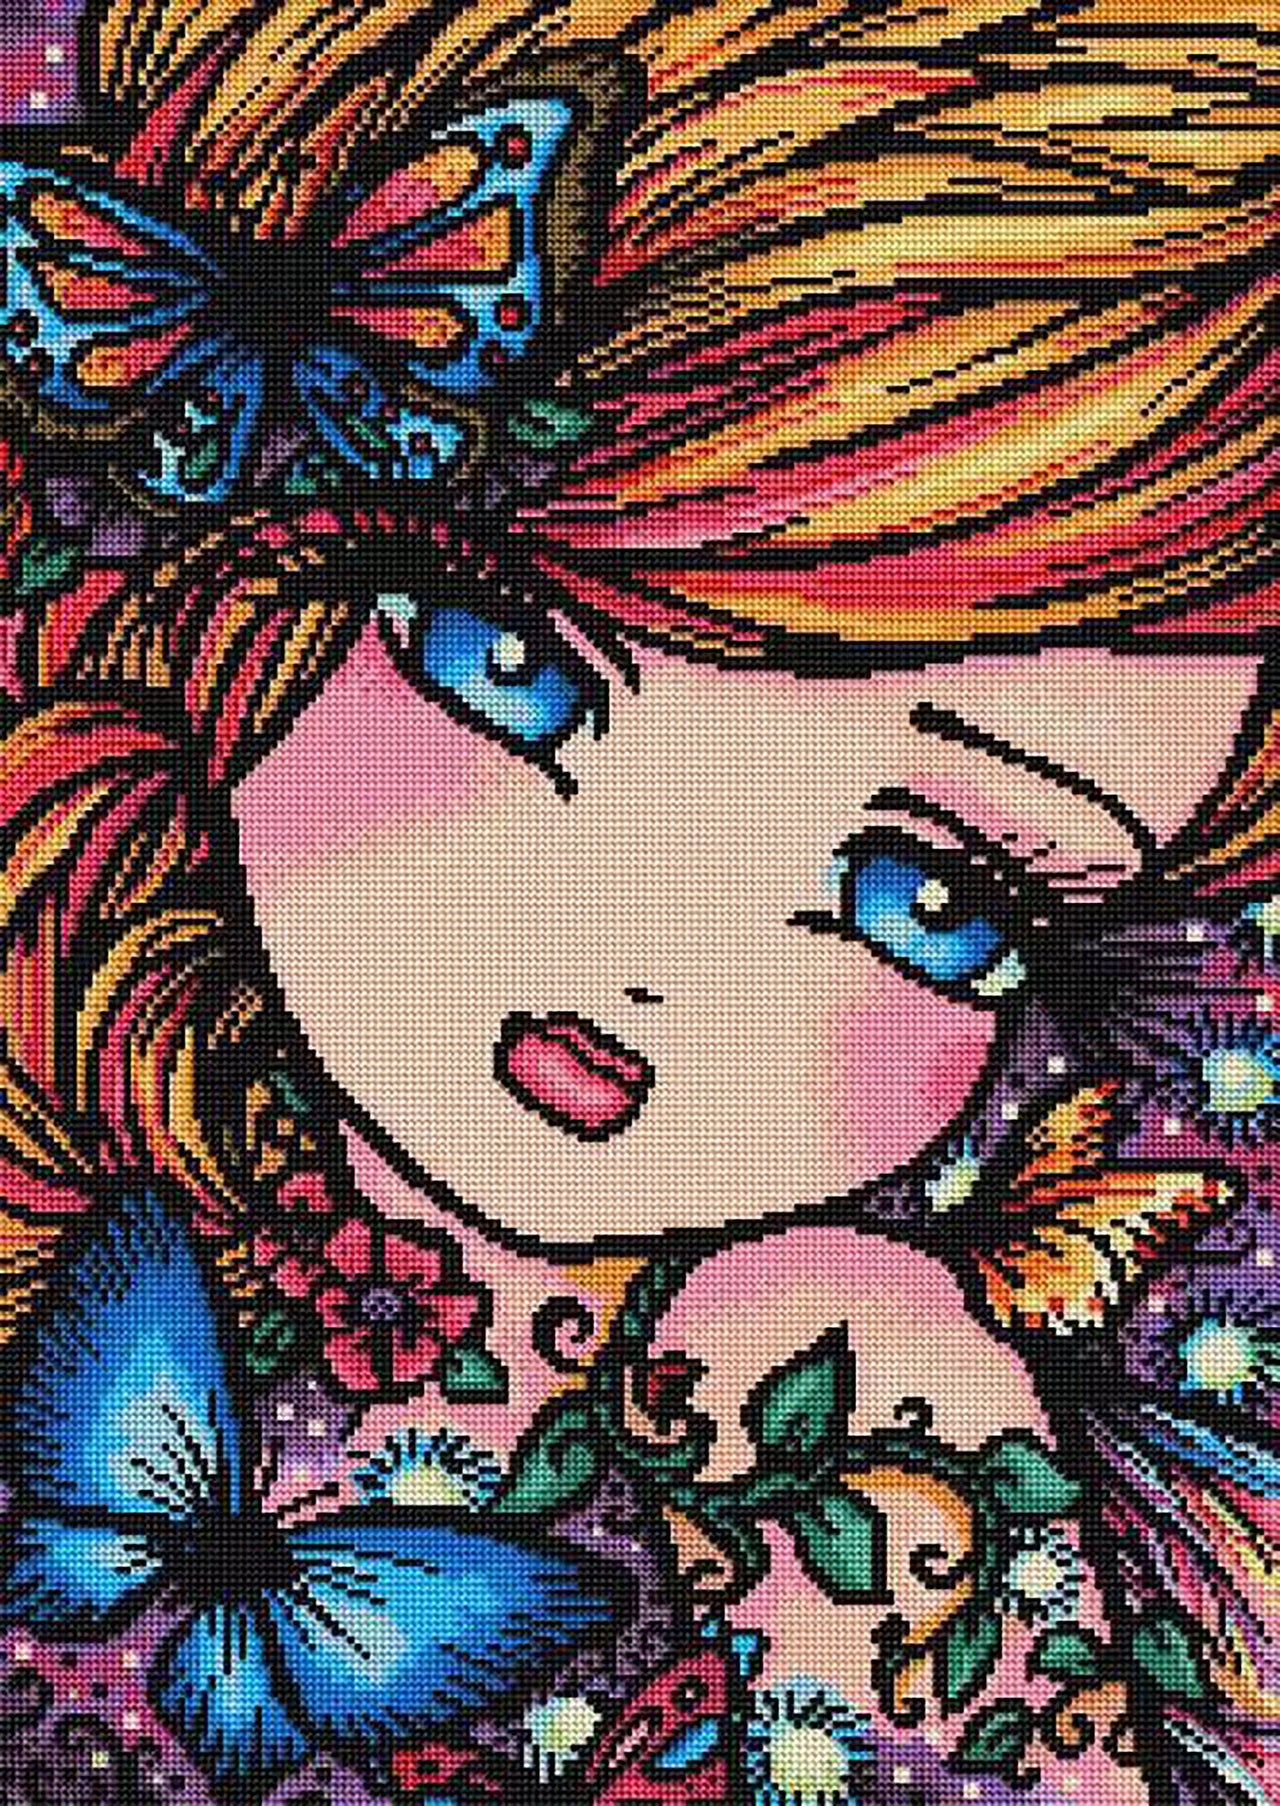 Diamond Painting April Fairy 18.5" x 26.0″ (47cm x 66cm) / Round With 33 Colors Including 2 ABs / 38,844